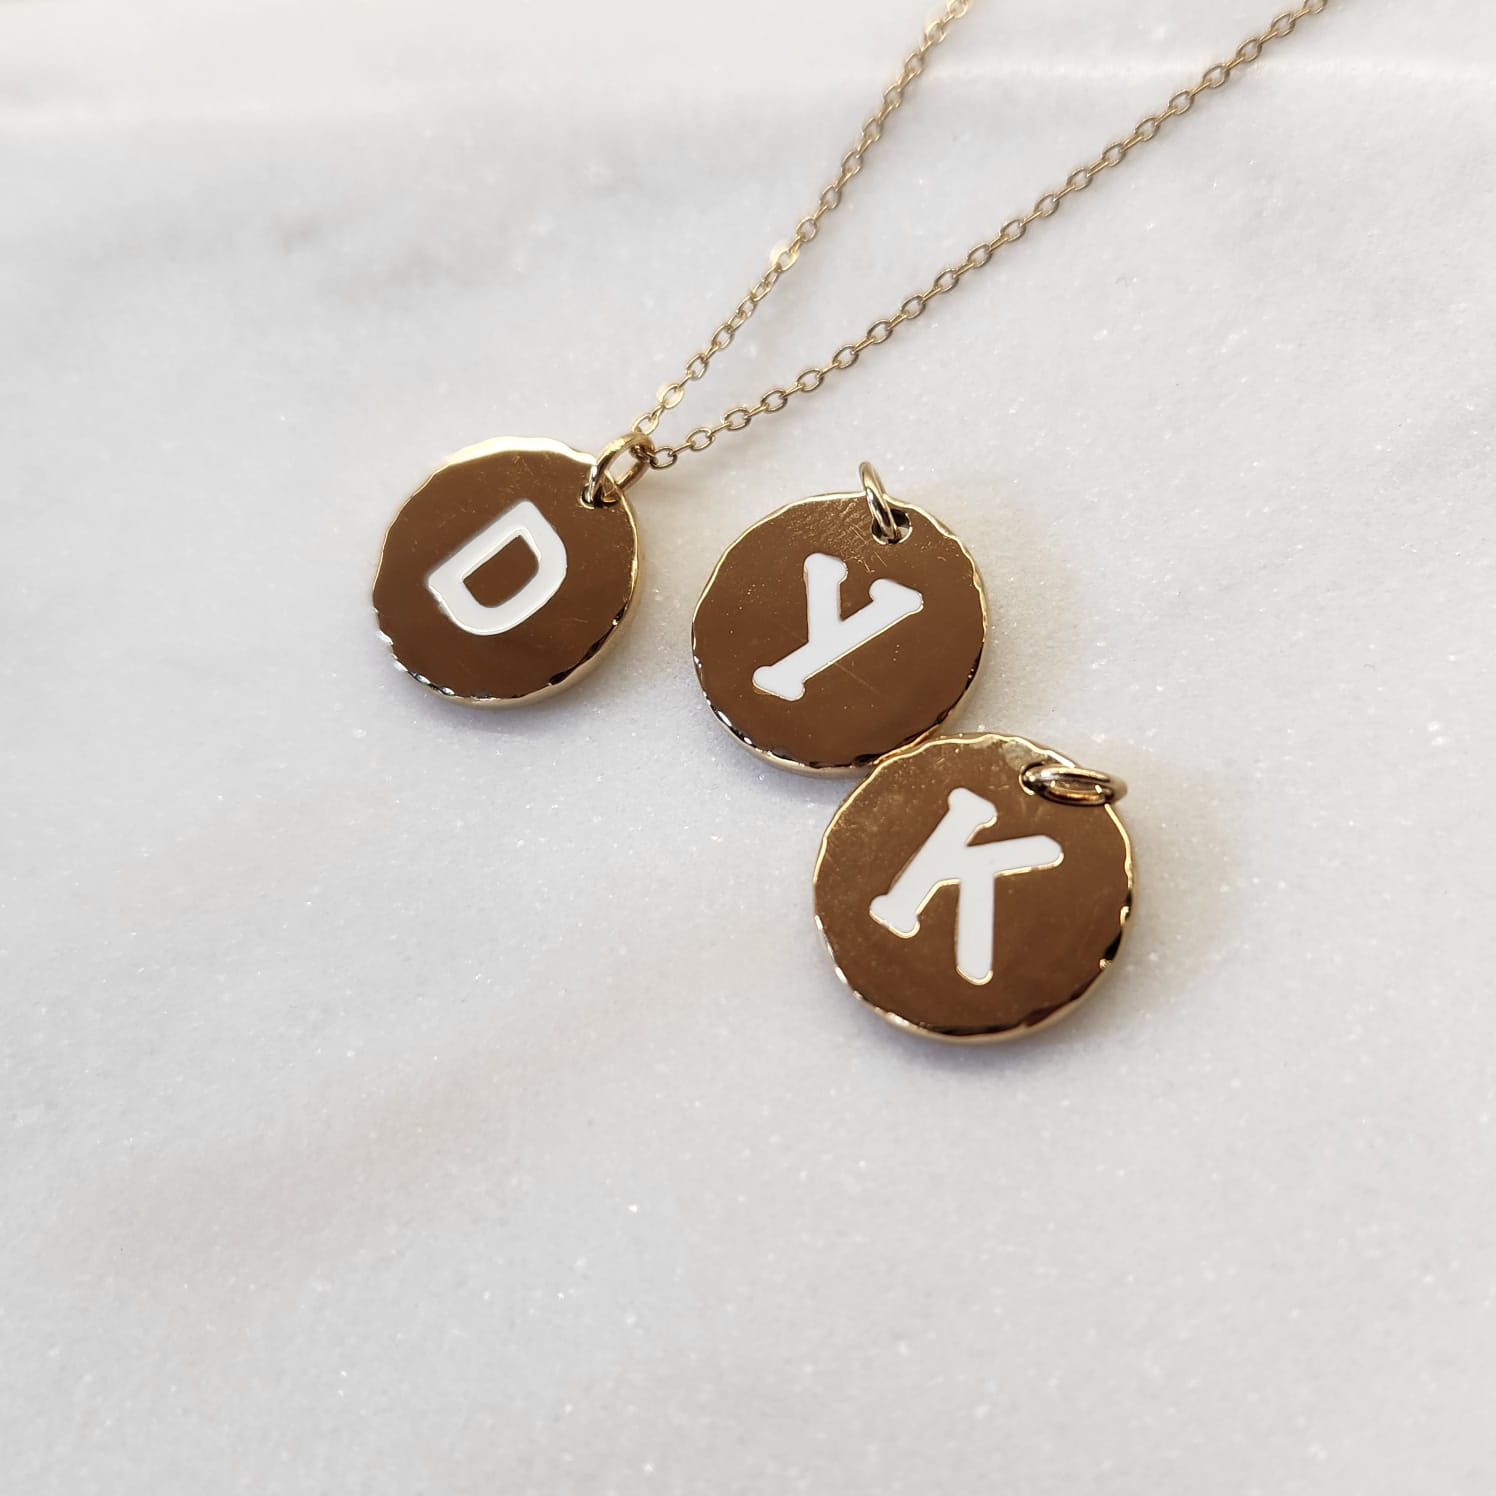 Fine and Yonder Necklaces White & Gold Initial Necklace